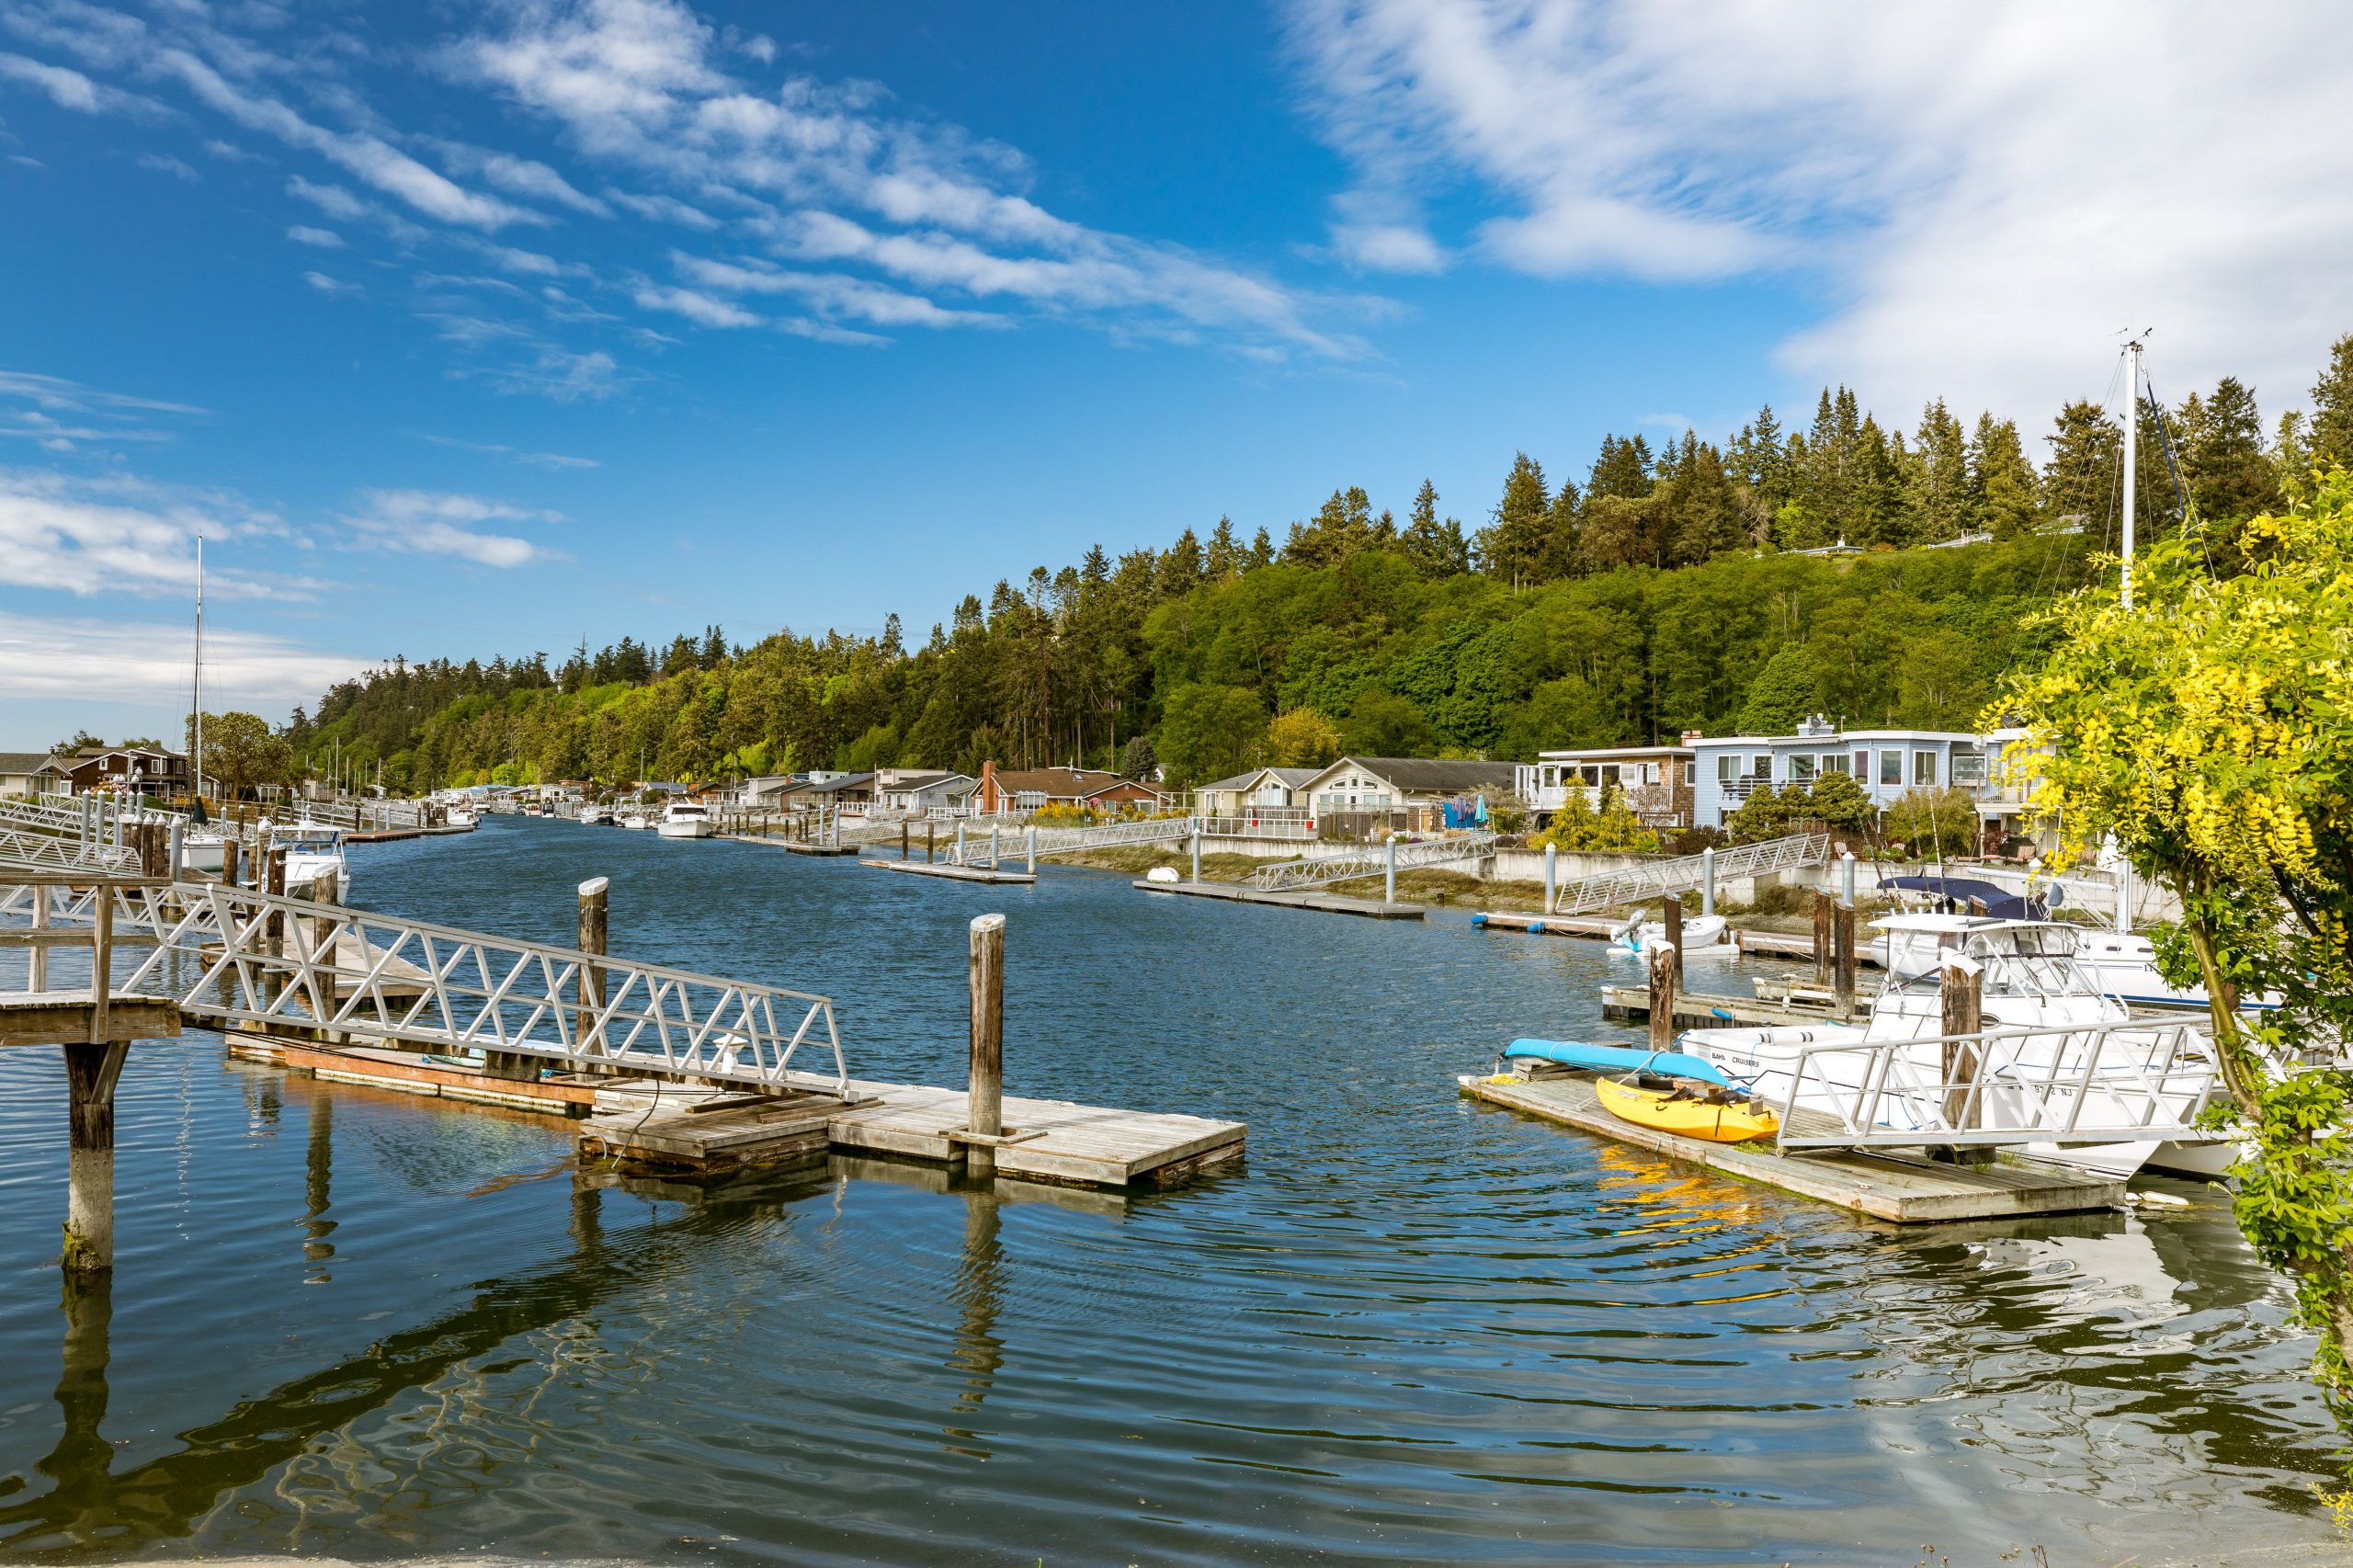 Sea life, Lifestyle, Island Life, PNW, Living in the North west, Windermere, Real Estate, Whidbey Island